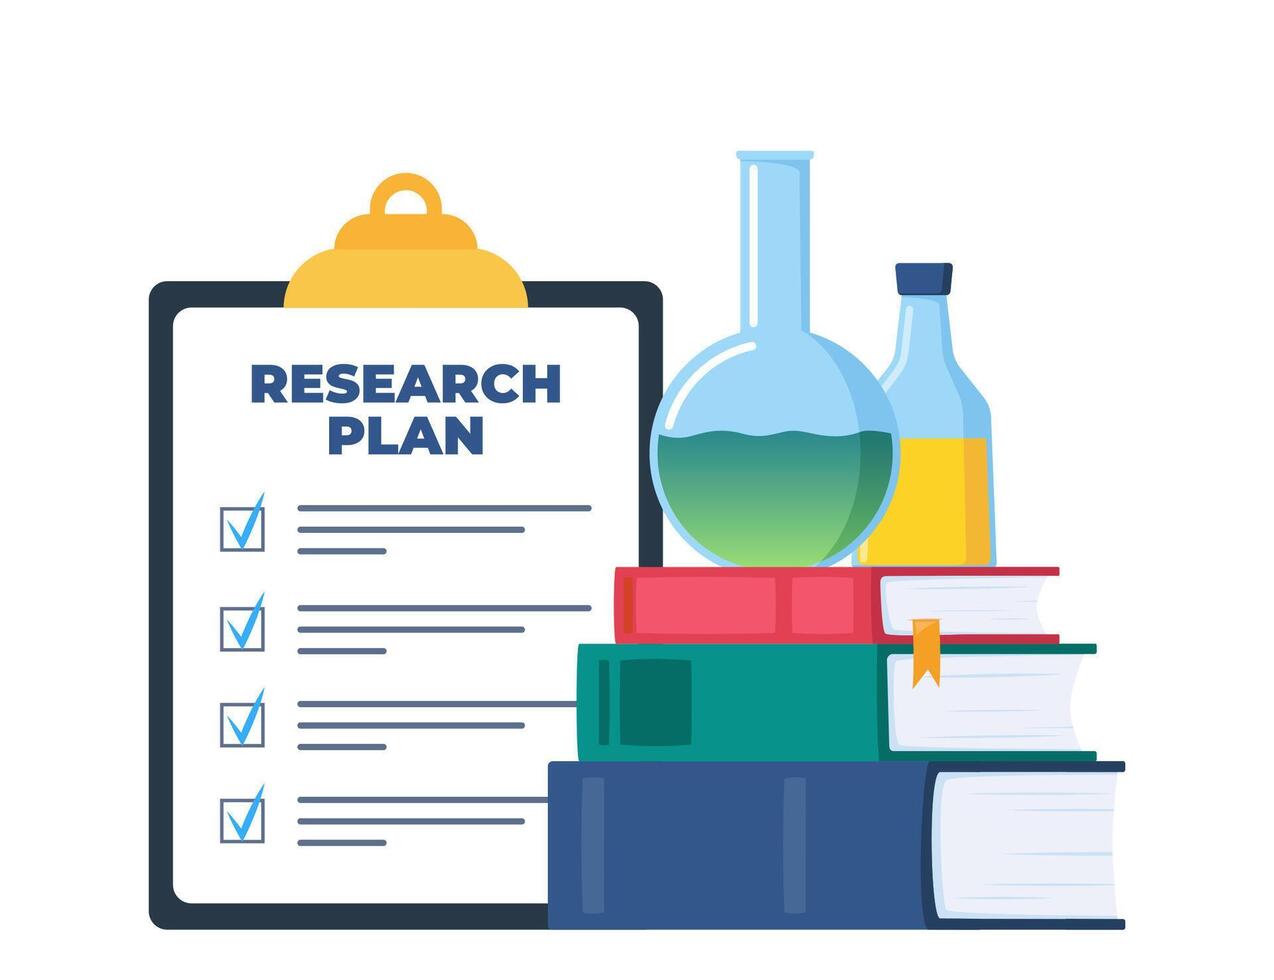 Chemical laboratory research plan on clipboard with checklist. Chemical Laboratory equipment and books. Lab research, testing, studies in chemistry. Vector illustration.